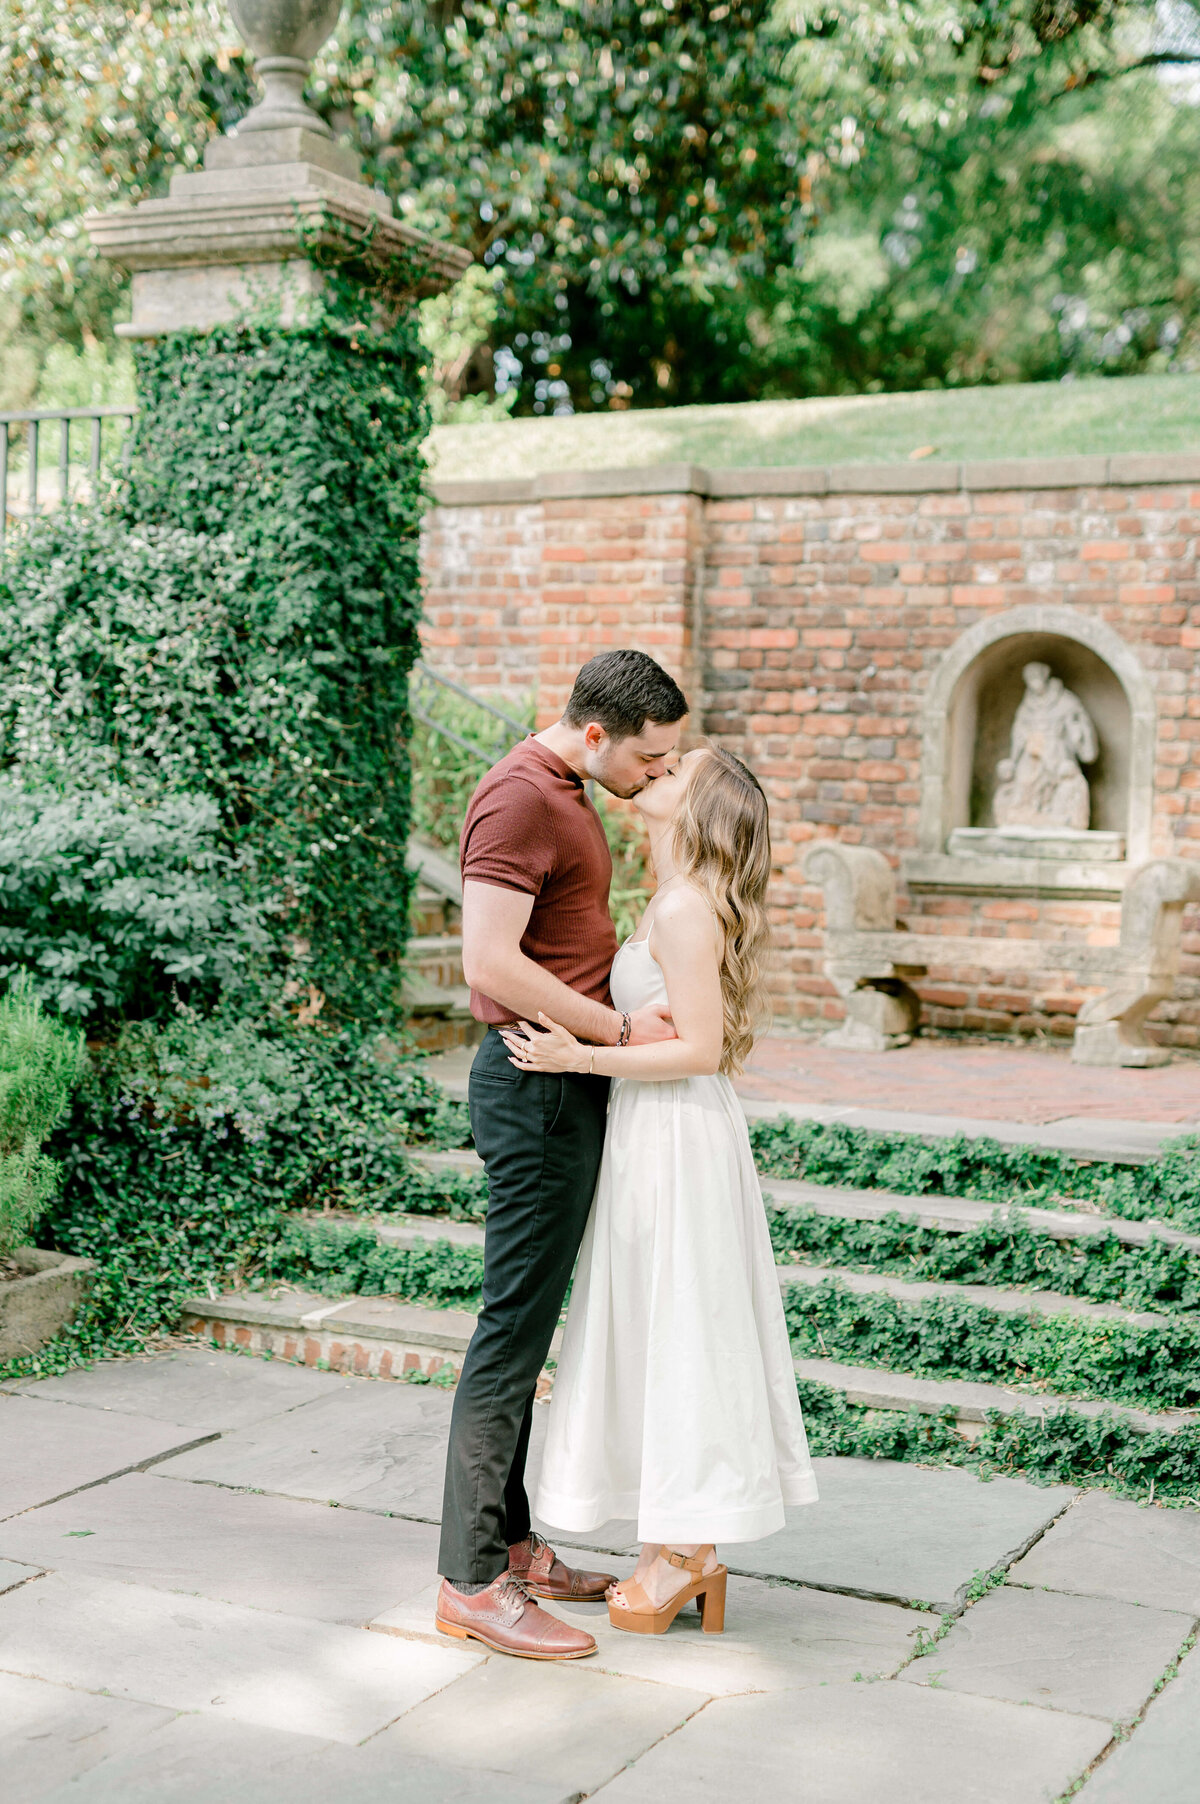 Portrait of a couple kissing in a garden with brick and ivy in the background.